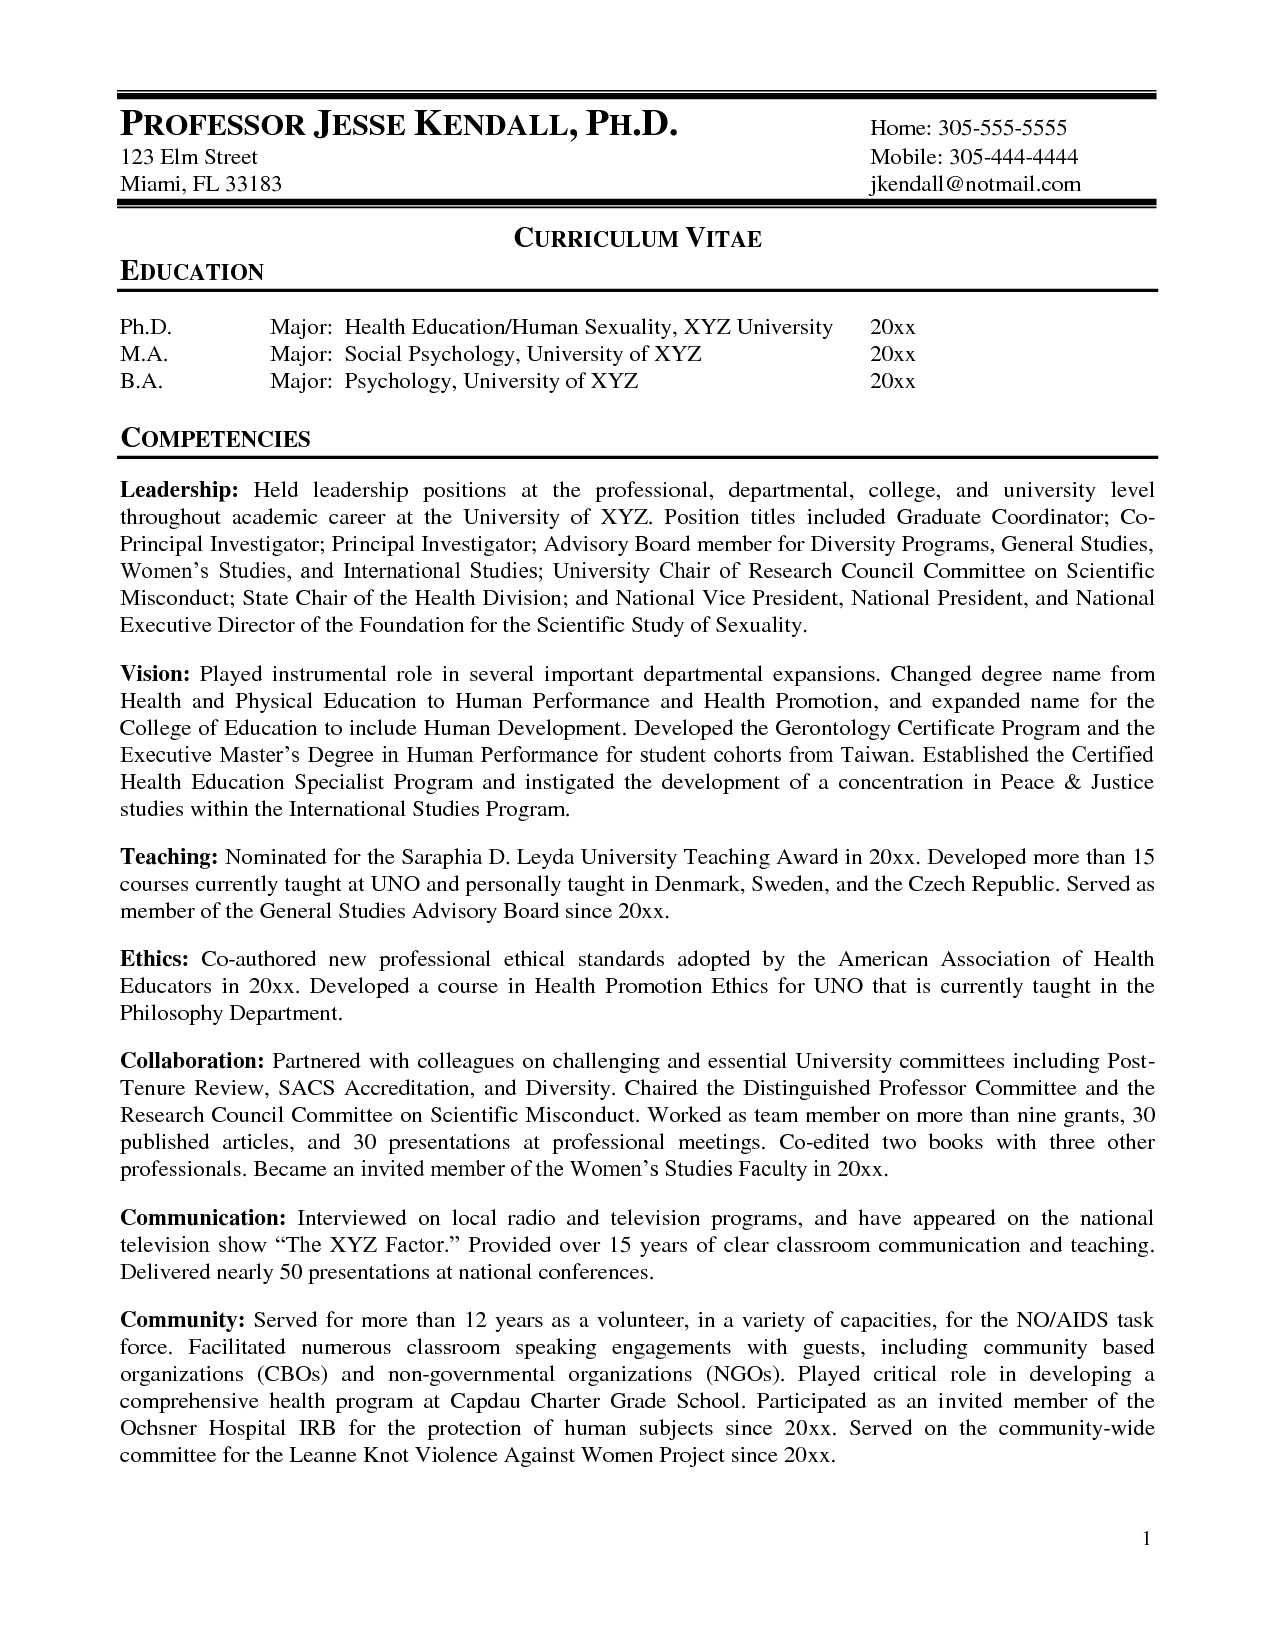 resume format for zoology lecturer